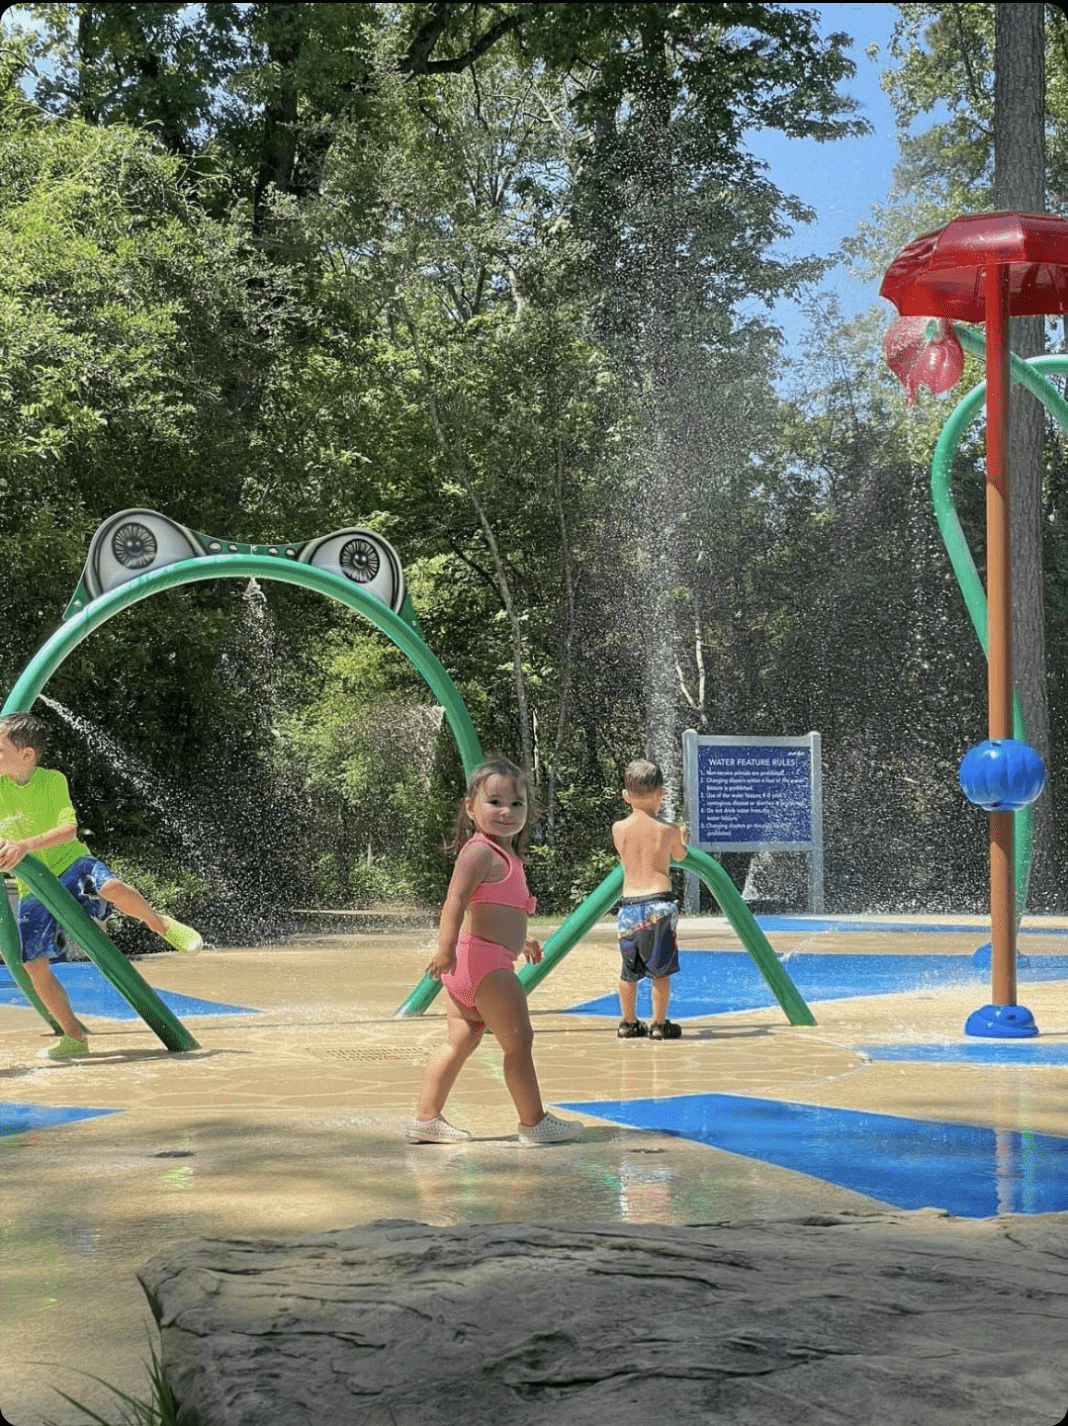 Houston's Big List of Splash Pads and Spray Parks for Families